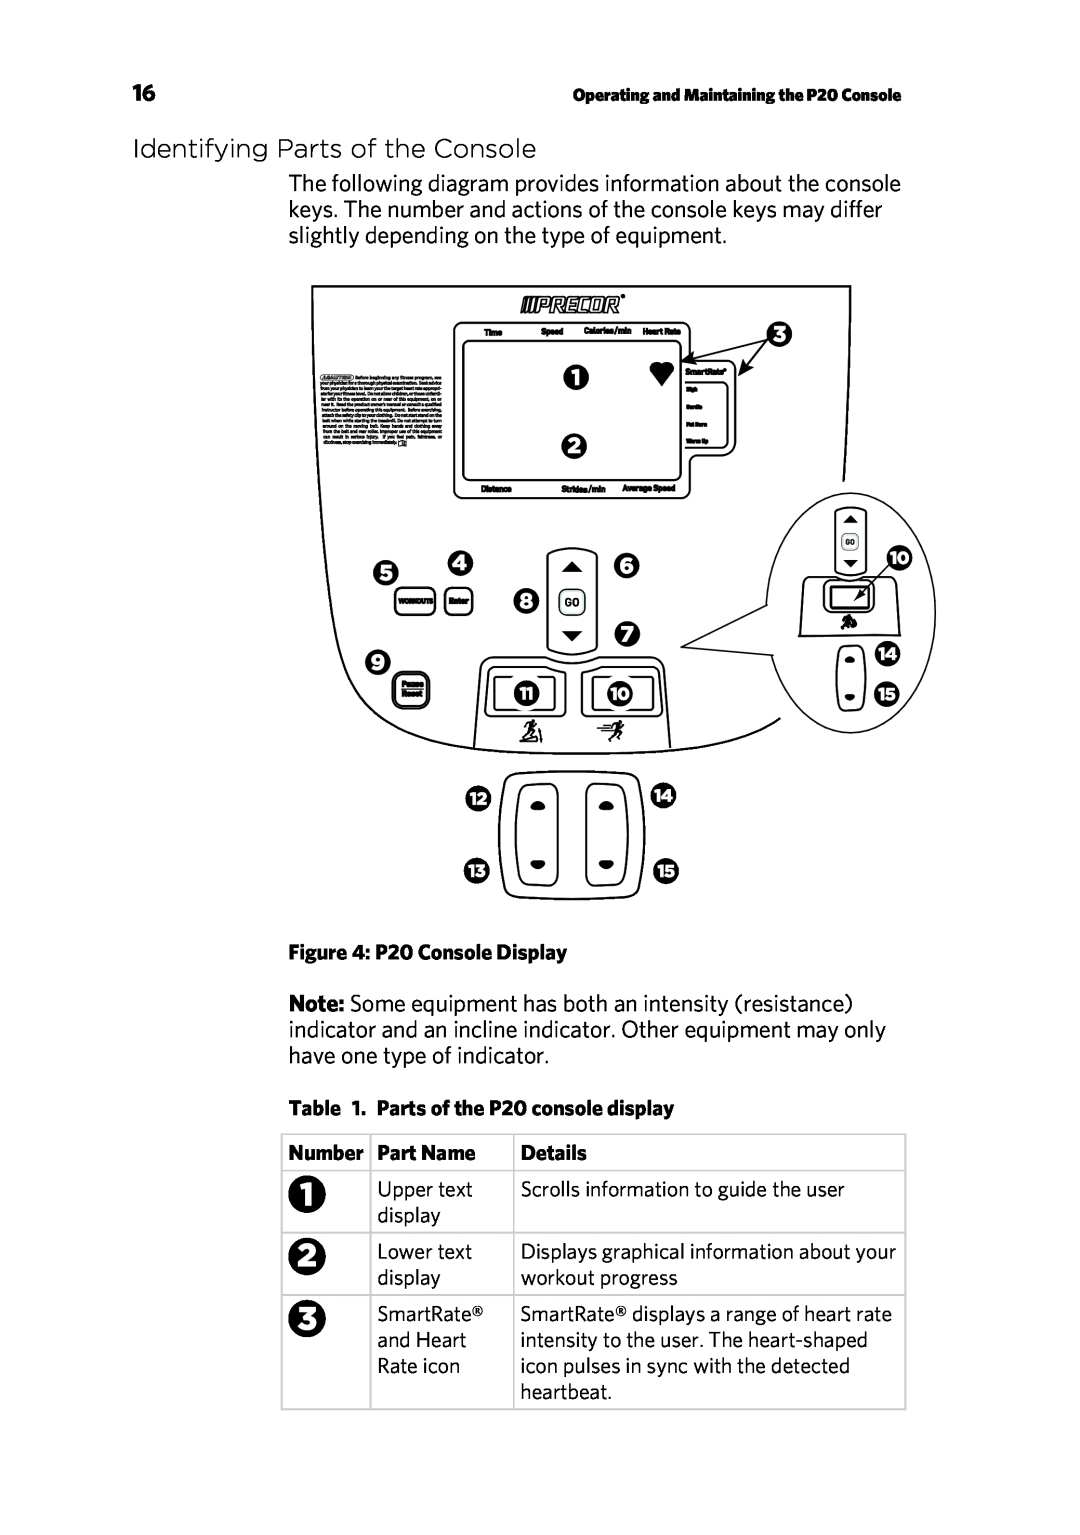 Precor 300753-201 manual Identifying Parts of the Console, P20 Console Display, Parts of the P20 console display, Details 